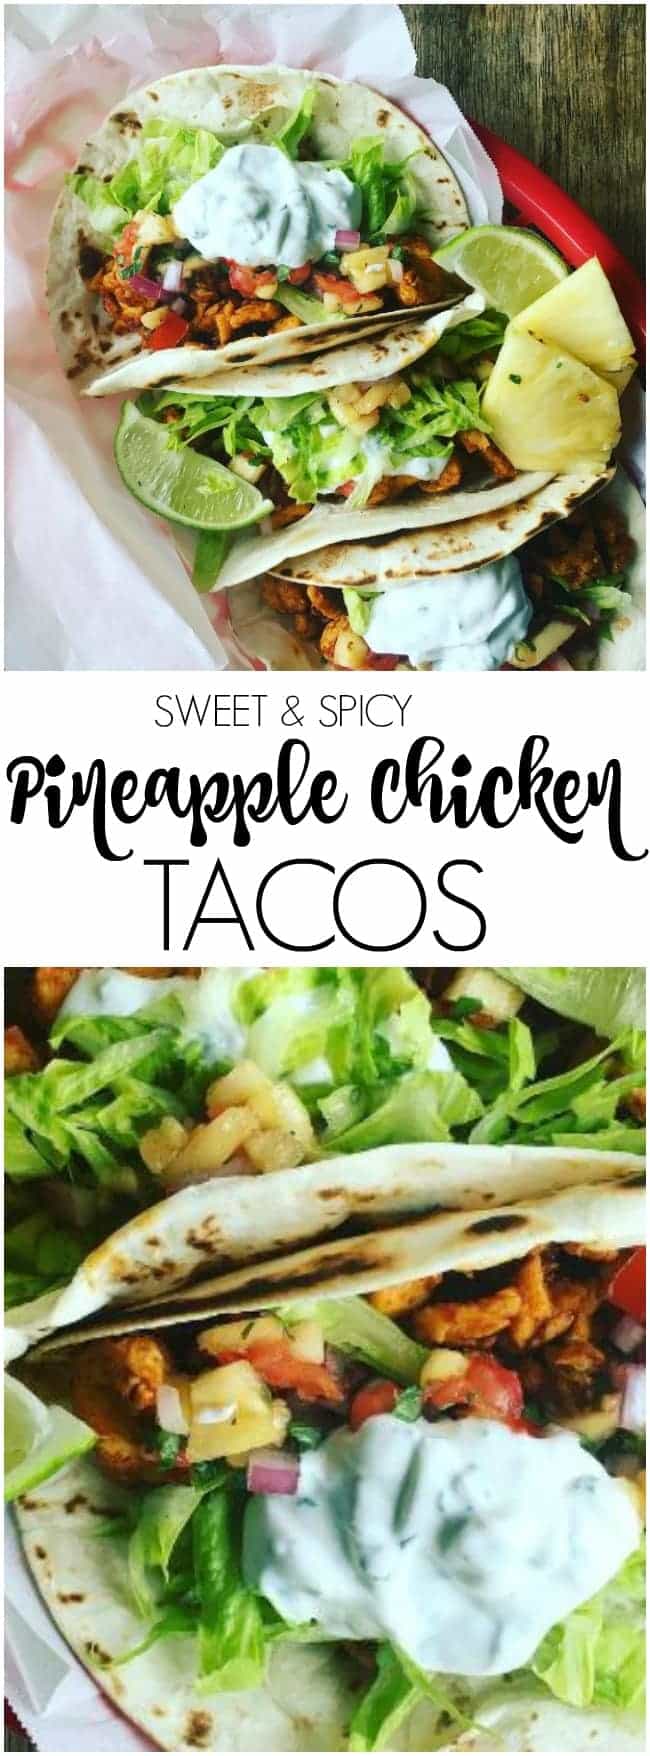 Sweet and spicy Pineapple Chicken Tacos Recipe - ready in just 25 minutes! Fast, fresh, delicious. 